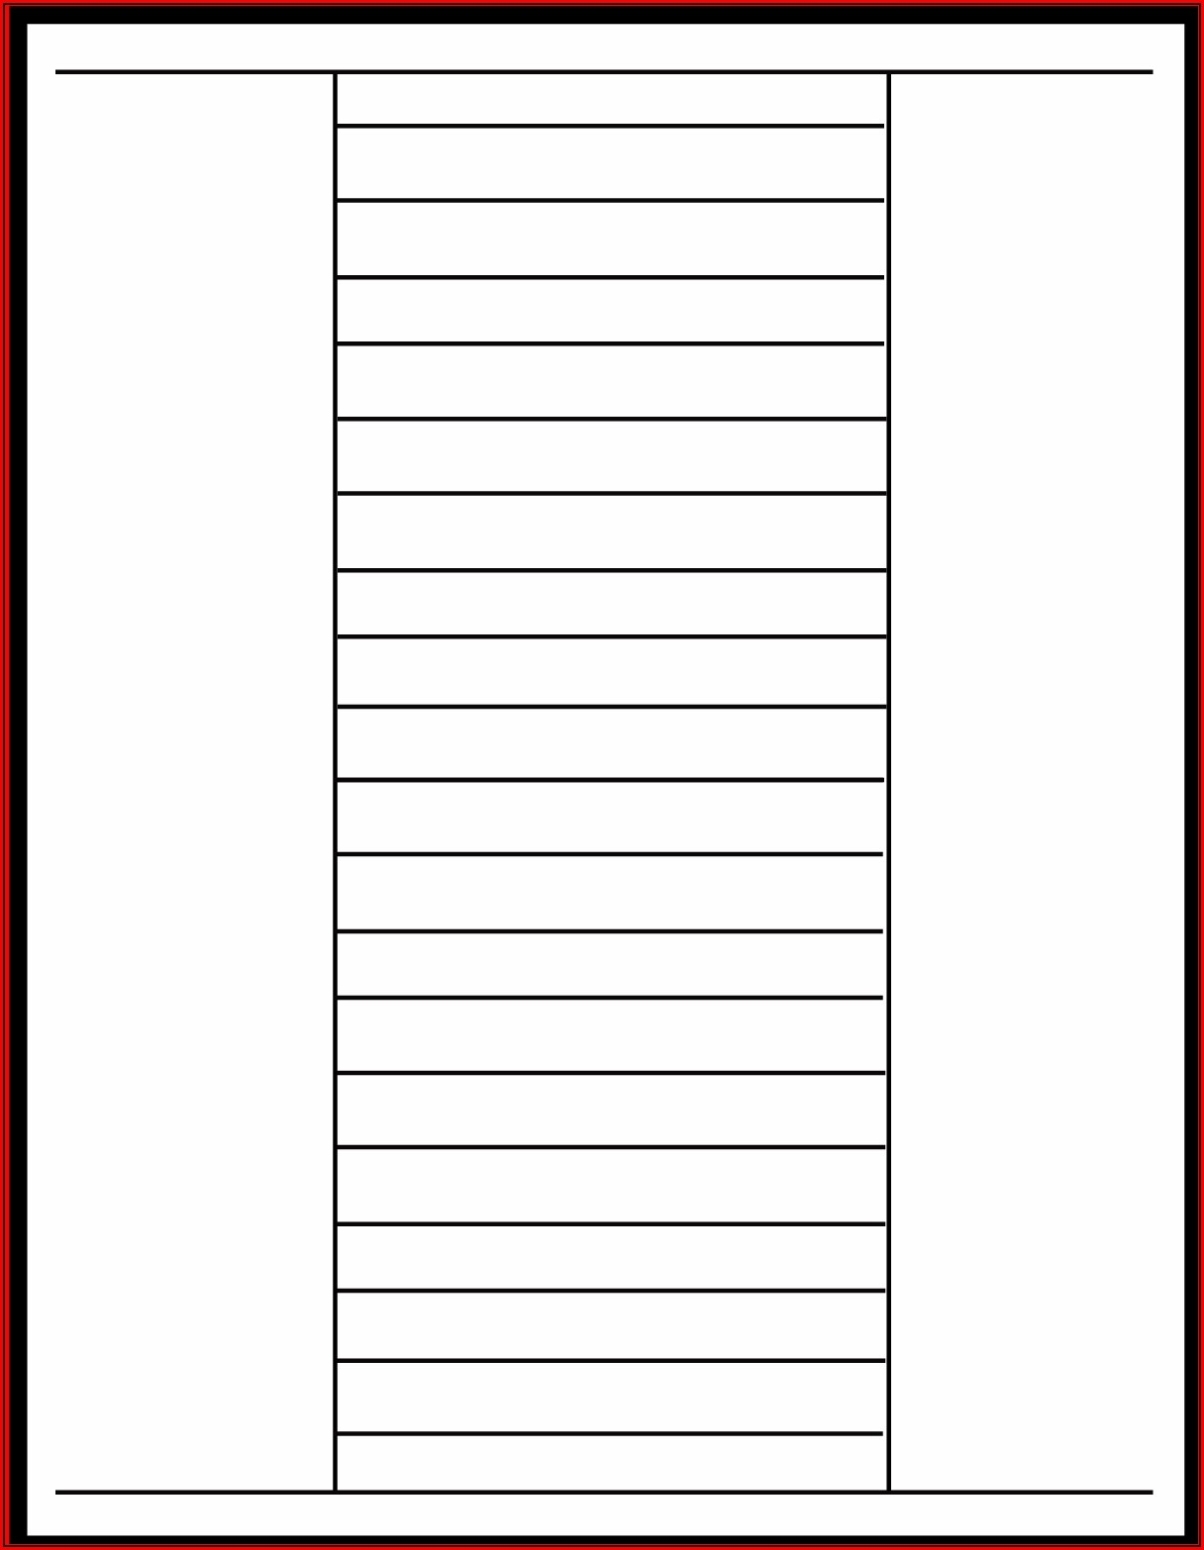 Staples 8 Tab Template Download – Staples Big Tab Insertable Paper Inside Staples Label Templates